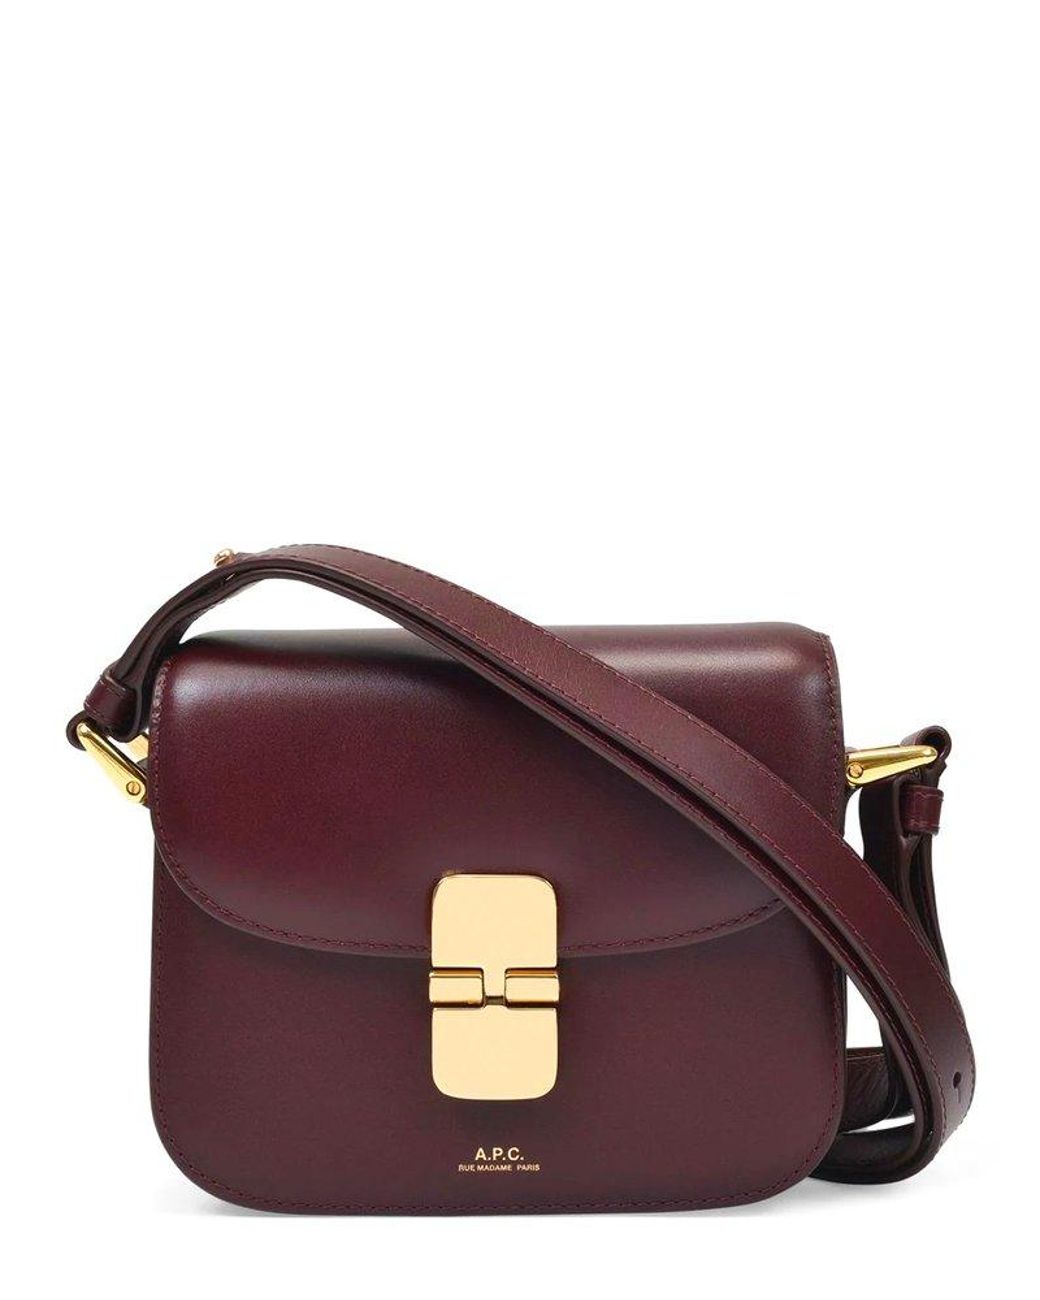 A.P.C. X Suzanne Koller Grace Small Shoulder Bag in Purple | Lyst